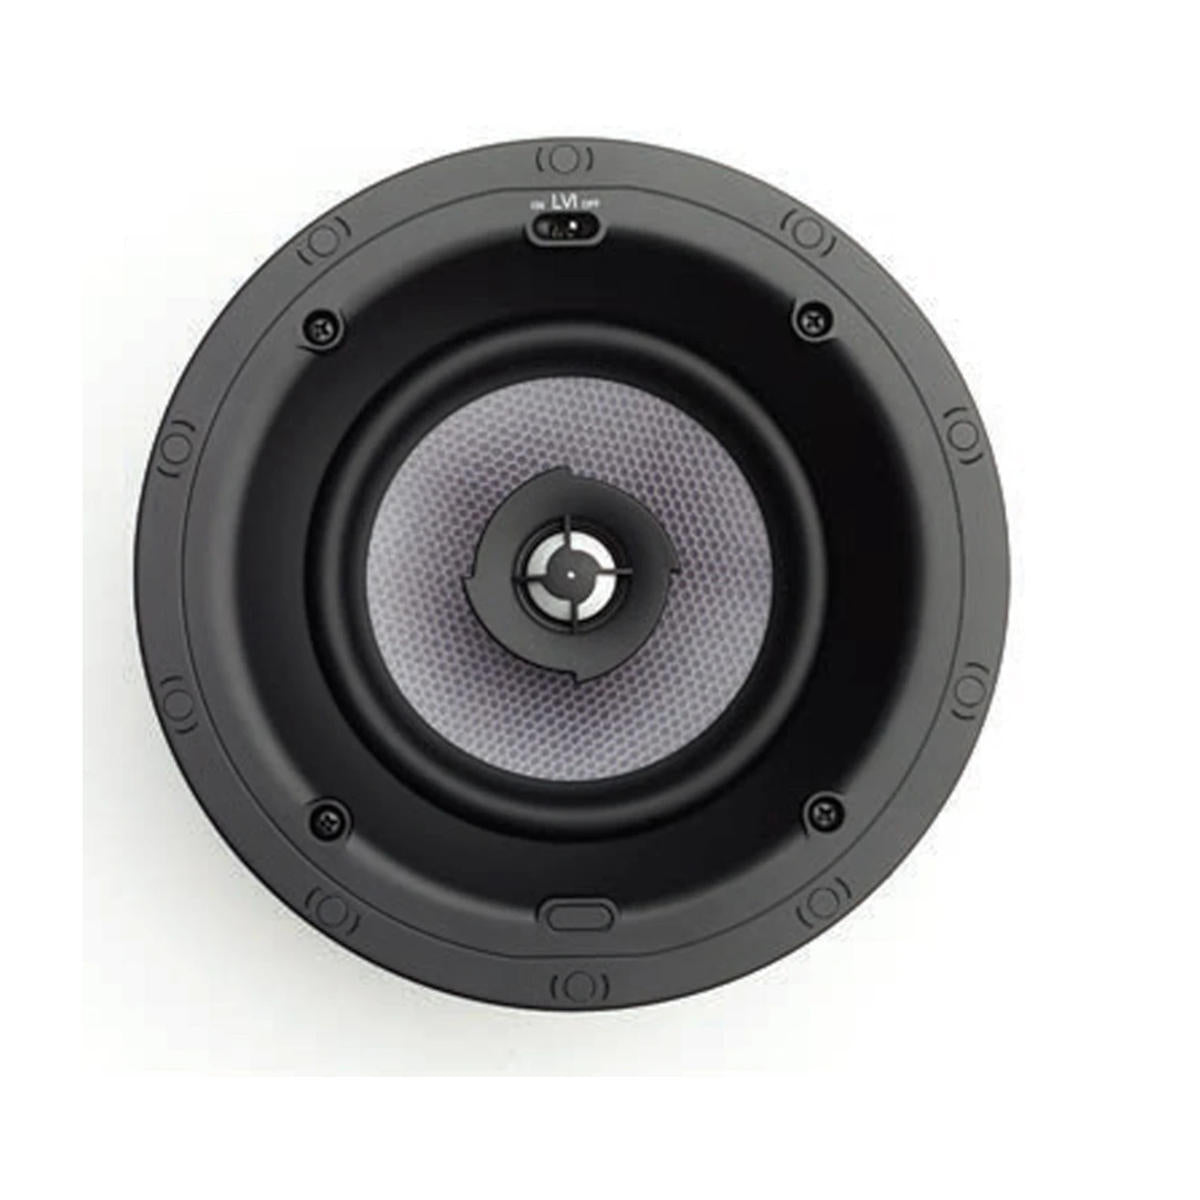 Totem KIN Architectural IC82 In-Ceiling Stereo Speaker - Ooberpad India